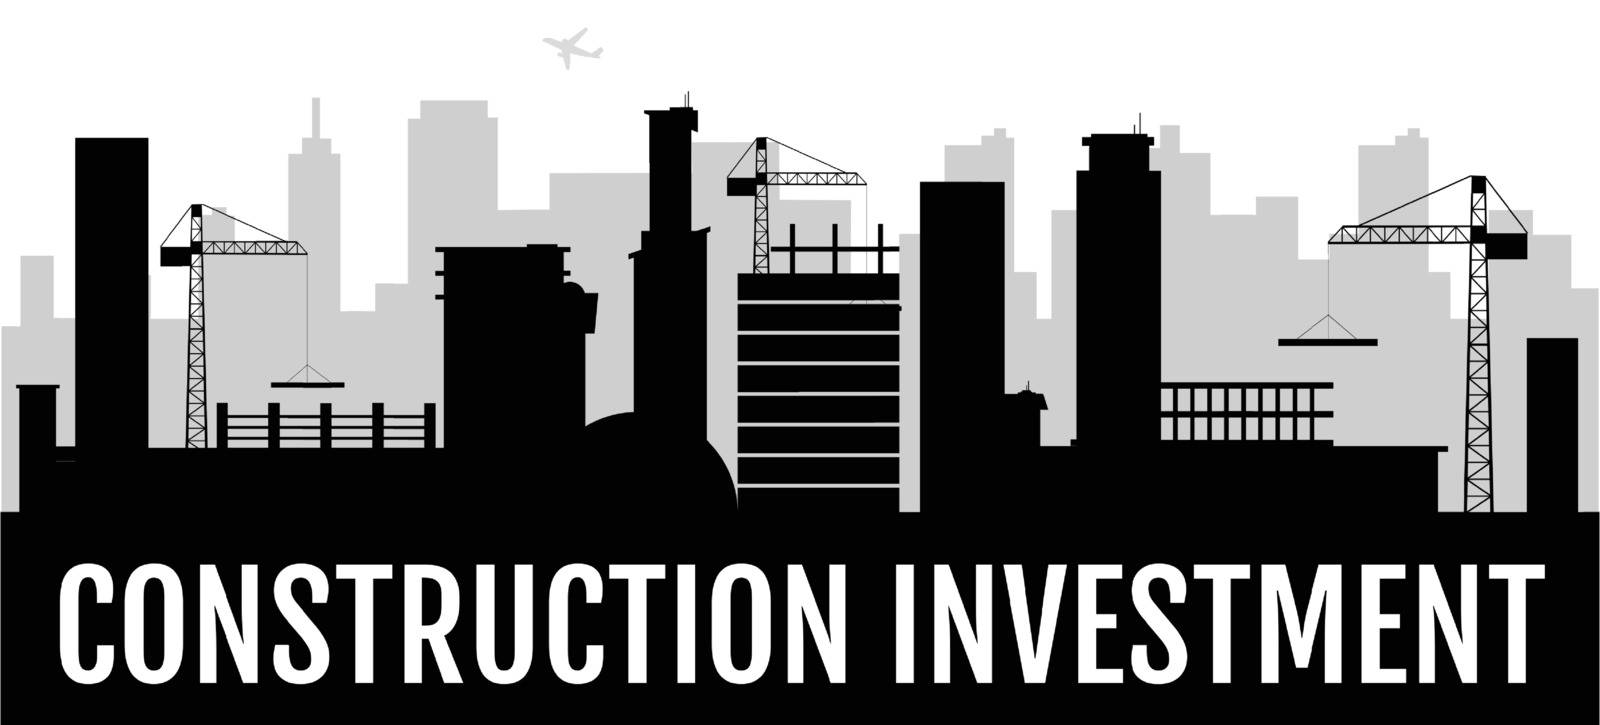 Construction investment black silhouette banner vector template. Urban development, building company horizontal poster monochrome design. Construction site 2d cartoon shape with typography by ntl